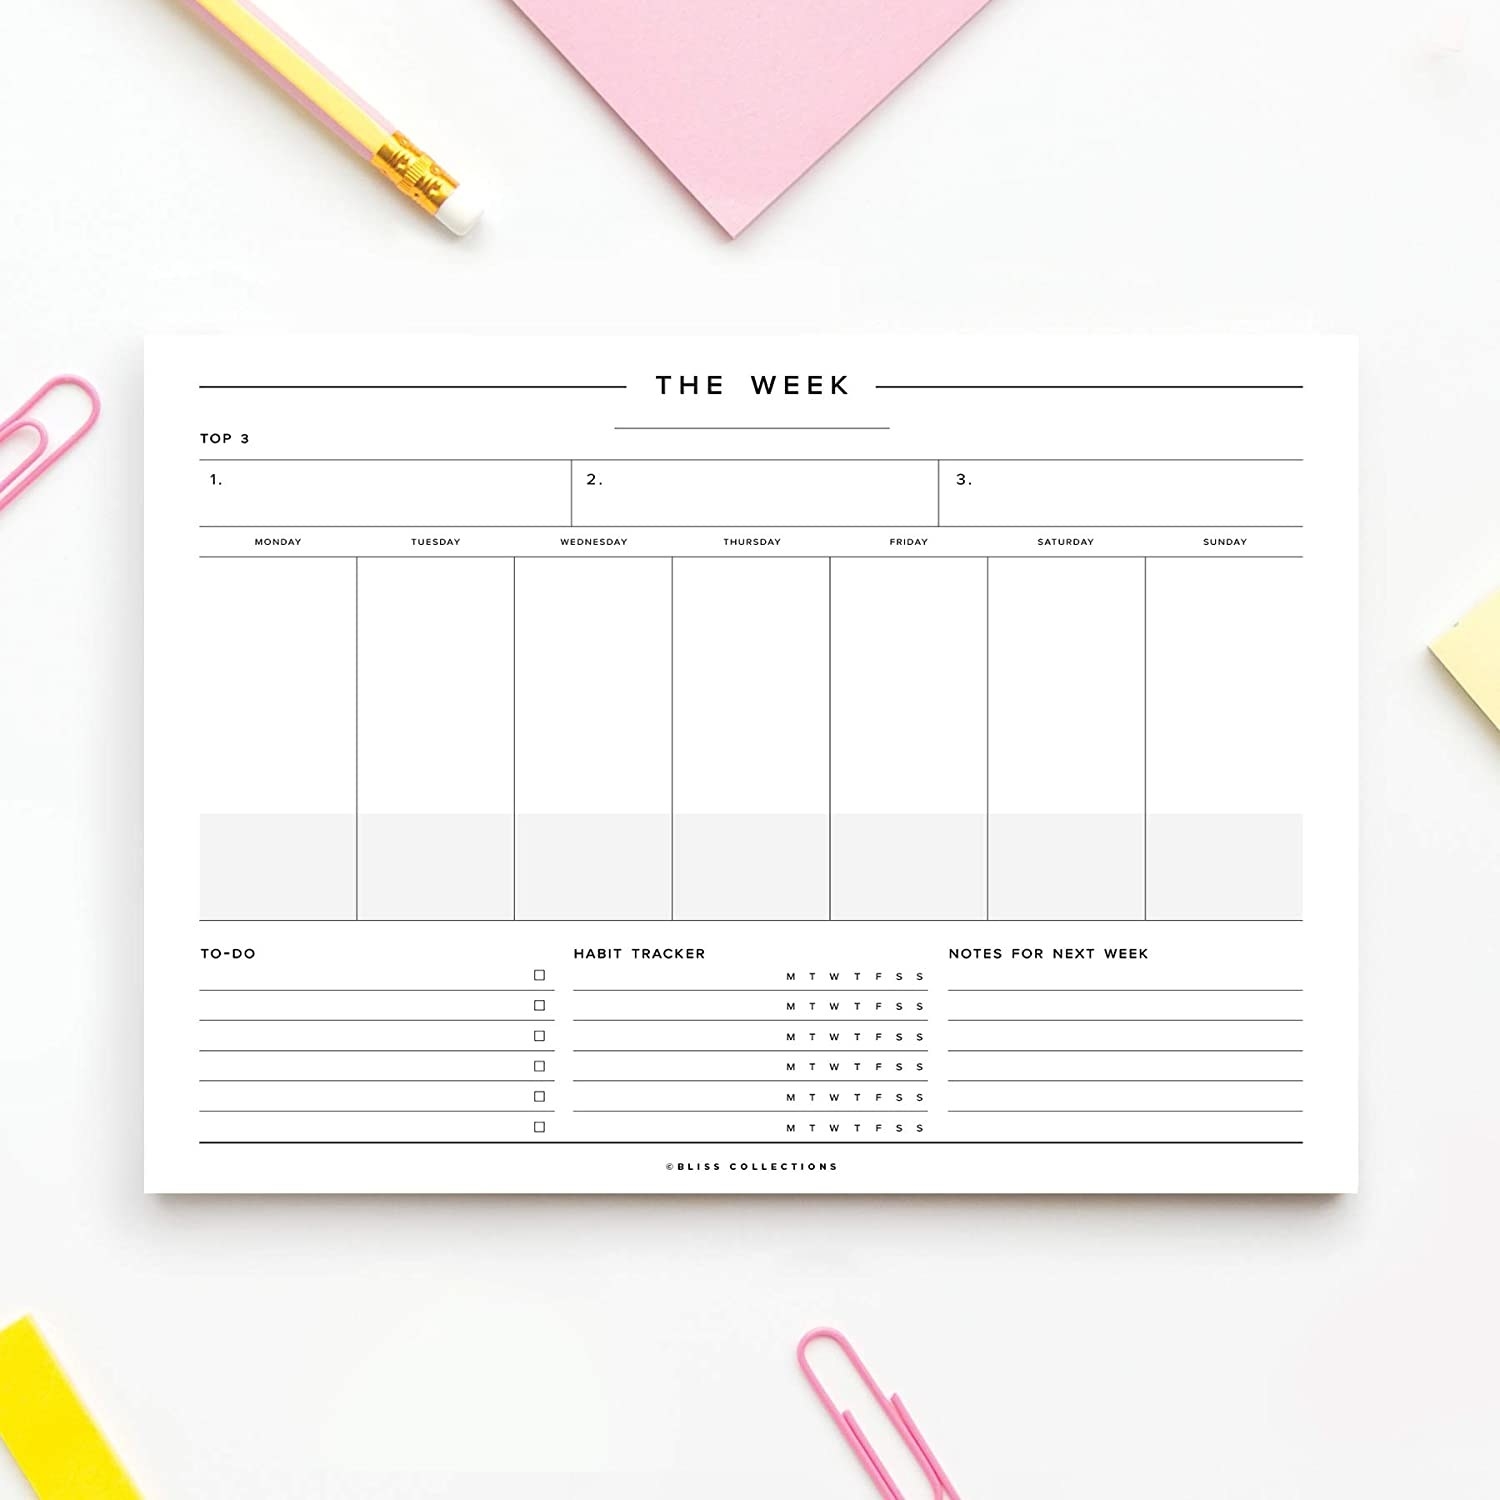 A weekly planner with a pencil next to it